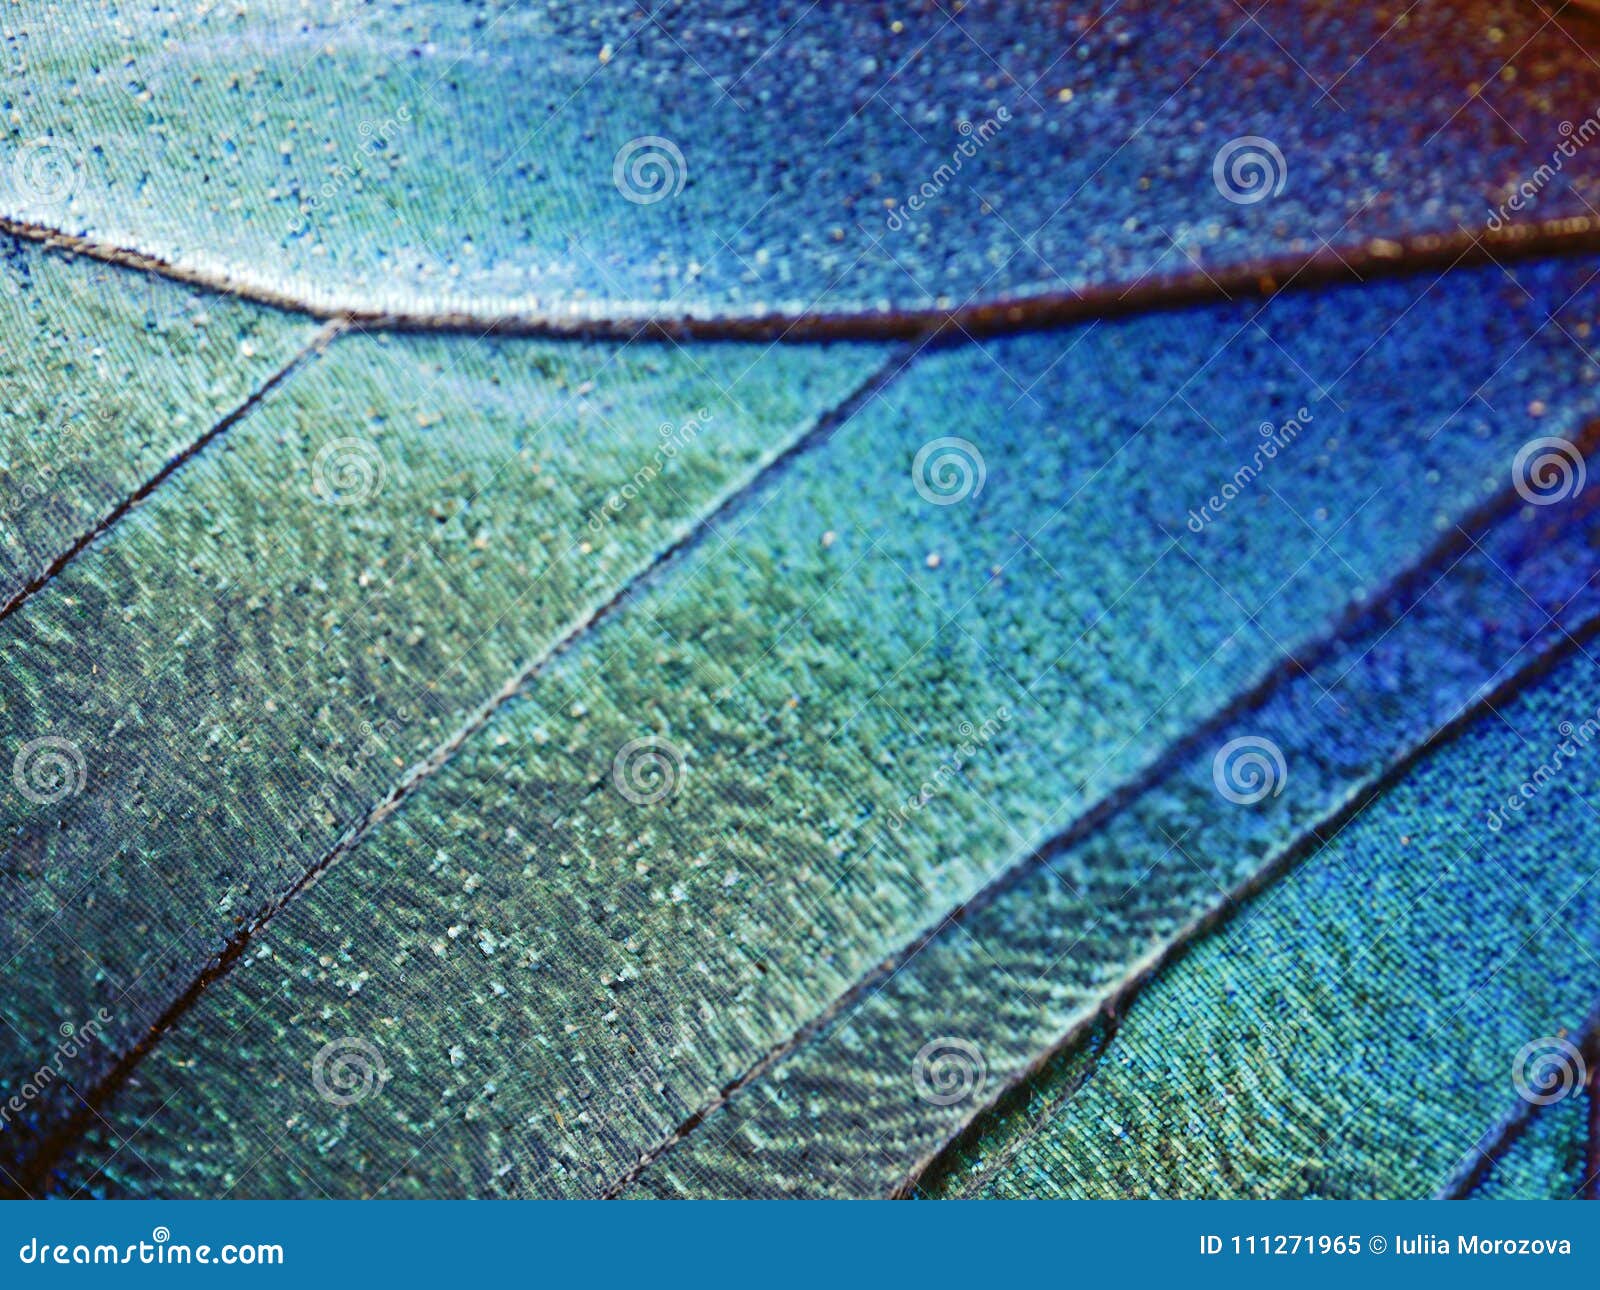 a fragment of a wing of the blue morpho butterfly, high magnification.